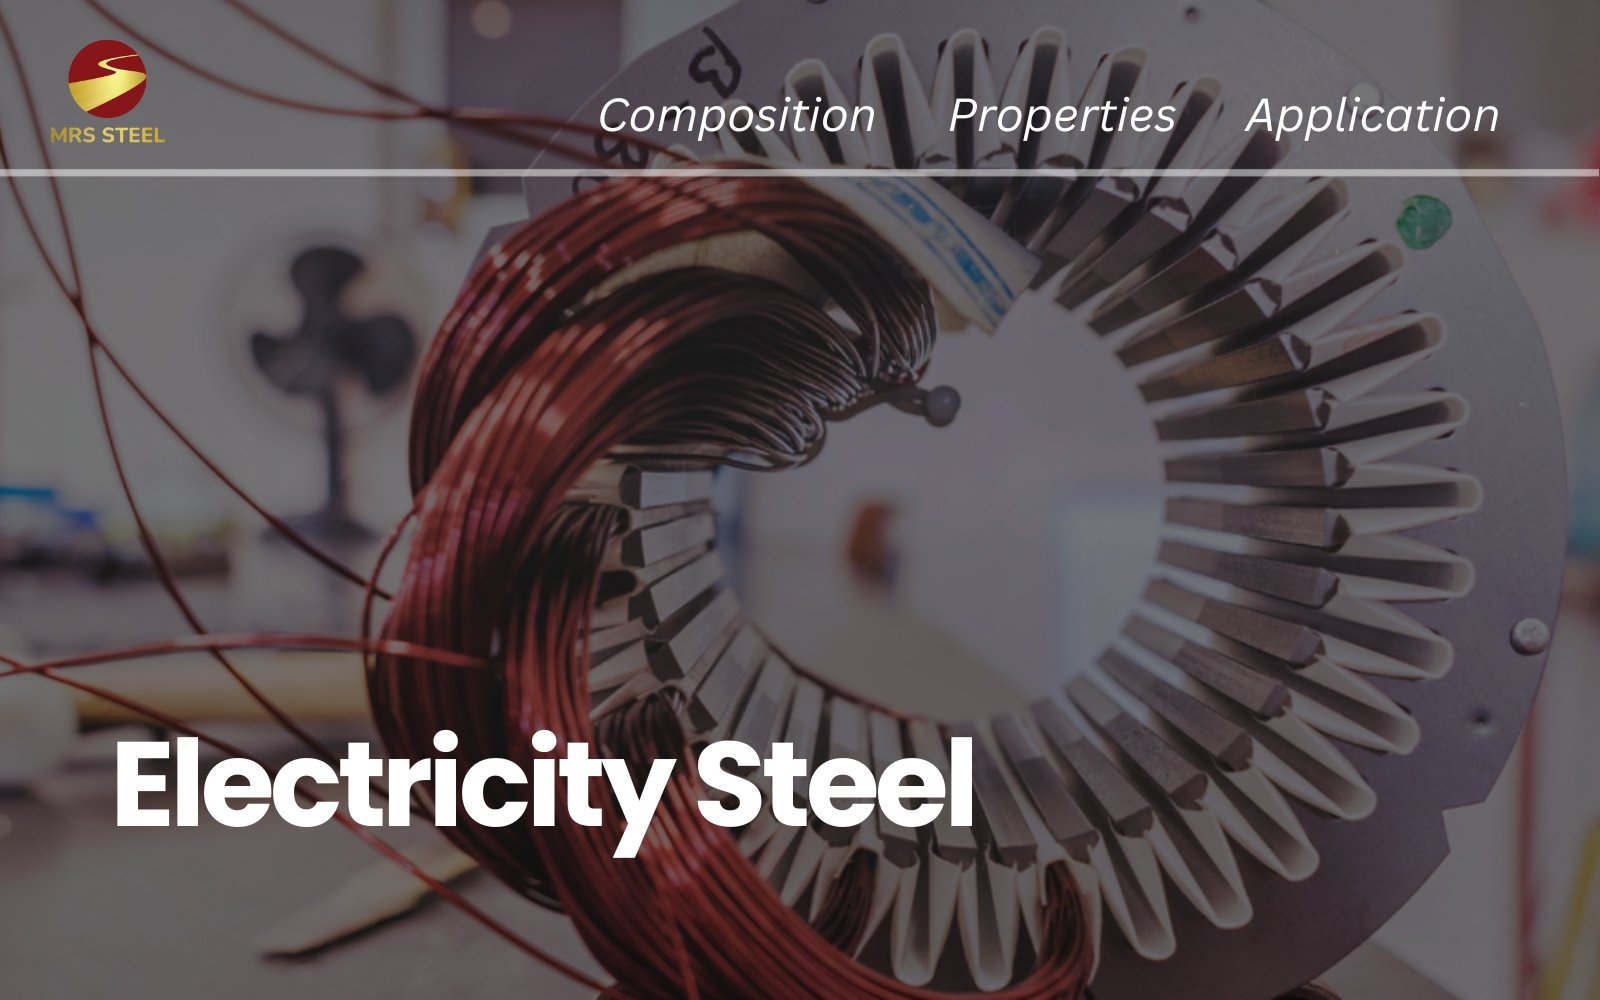 Overview of electrical steel - Composition, characteristics and applications